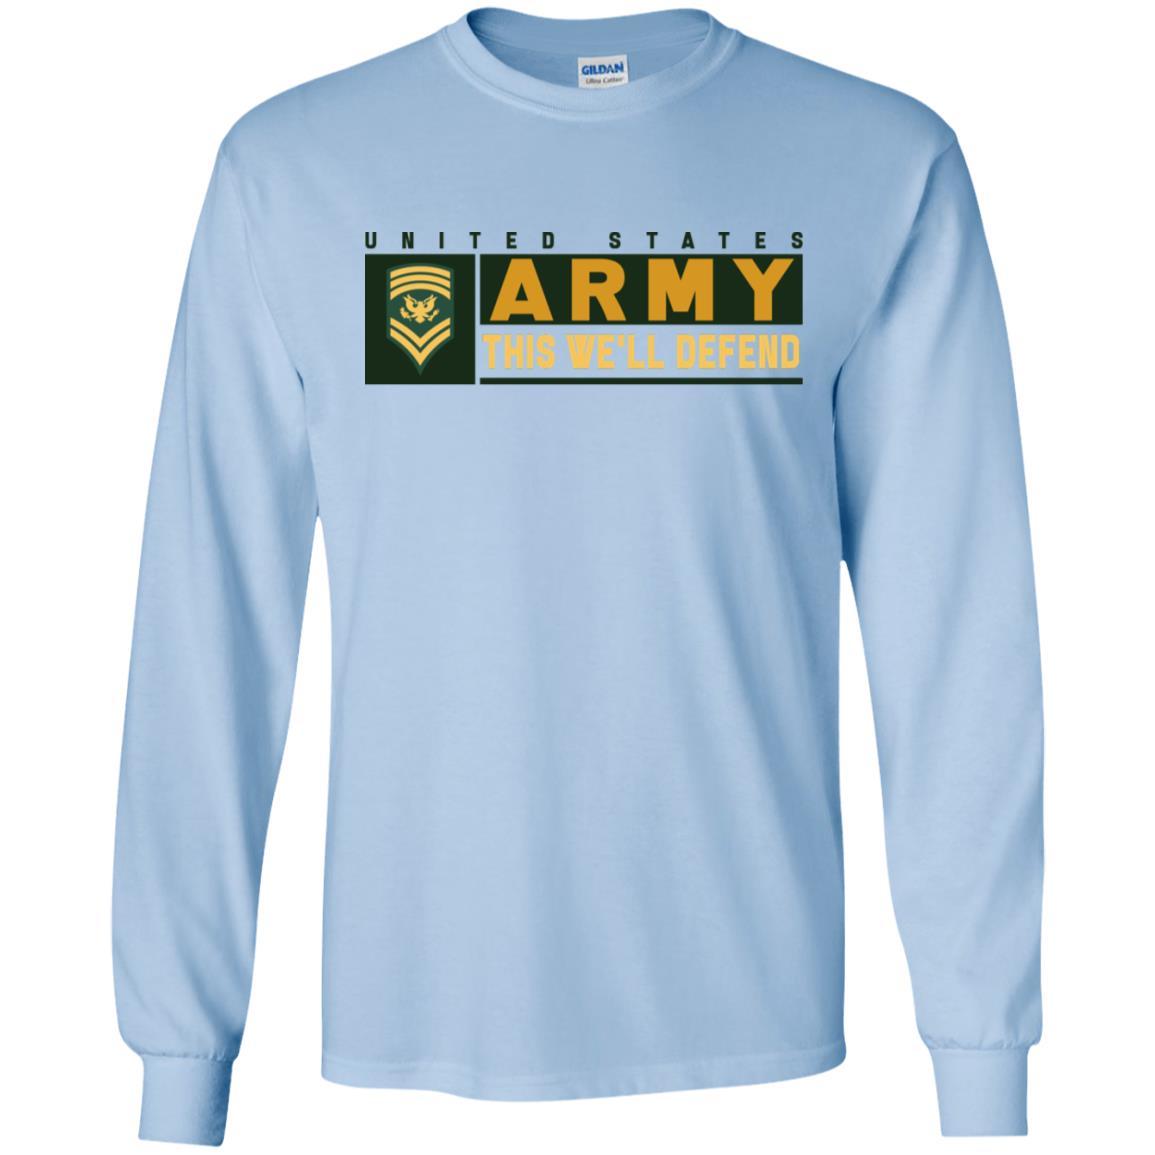 US Army E-9 SPC This We Will Defend T-Shirt On Front For Men-TShirt-Army-Veterans Nation